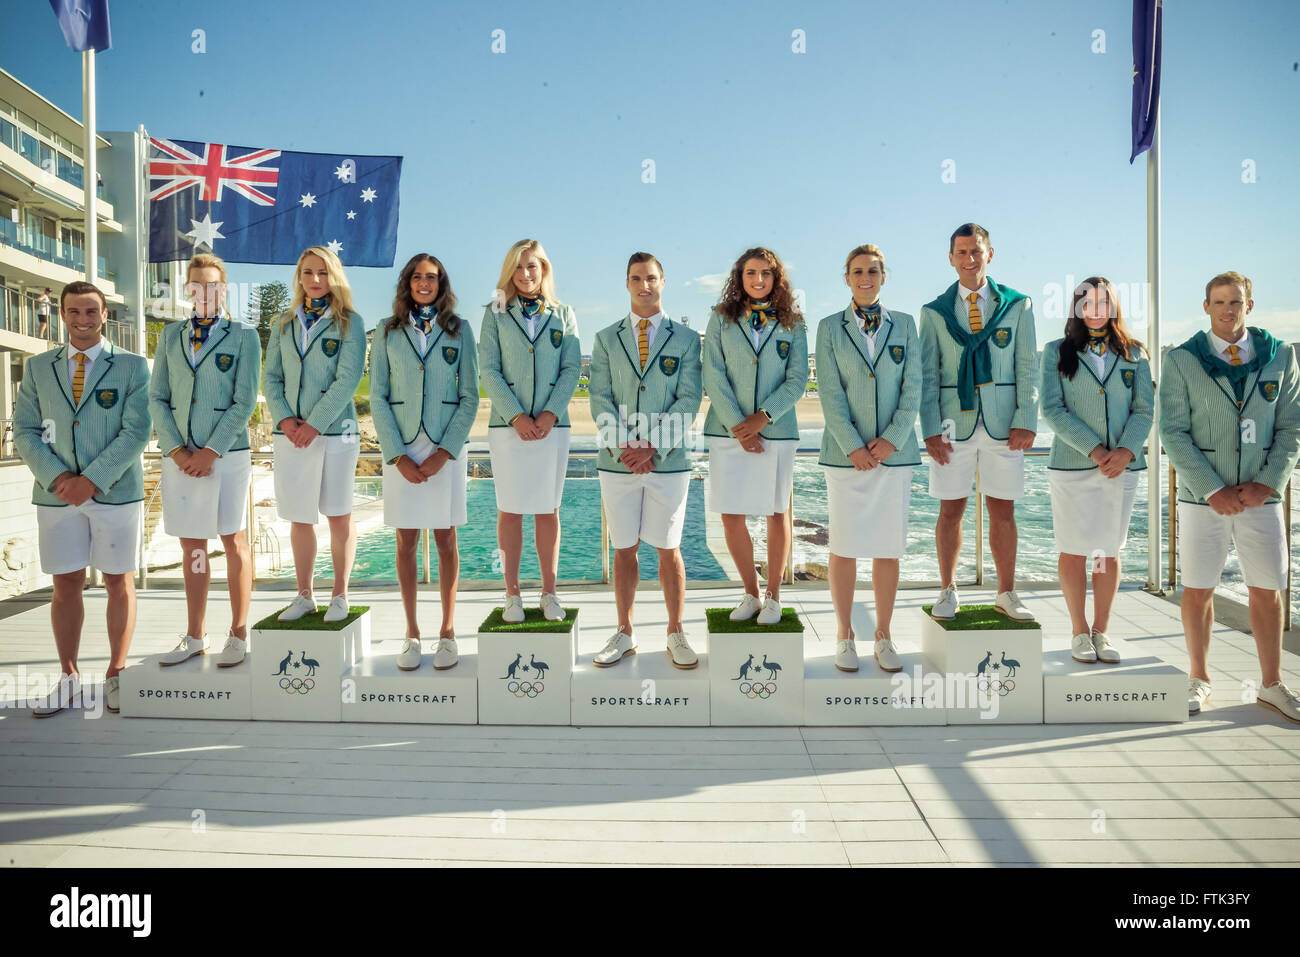 Sydney, Australia. 30th Mar, 2016. The Australian Olympic Committee (AOC) unveiled the Opening Ceremony Uniforms for the 2016 Australian Olympic Team on 30 March in Bondi, Sydney. (L-R) Joshua Dunkley-Smith, Louise Bawden, Kaarle McCulloch, Taliqua Clancy, Annette Edmondson, Ed Jenkins, Jessica Fox, Penny Taylor, Jamie Dwyer, Charlotte Caslick and Ken Wallace Credit:  Hugh Peterswald/Pacific Press/Alamy Live News Stock Photo